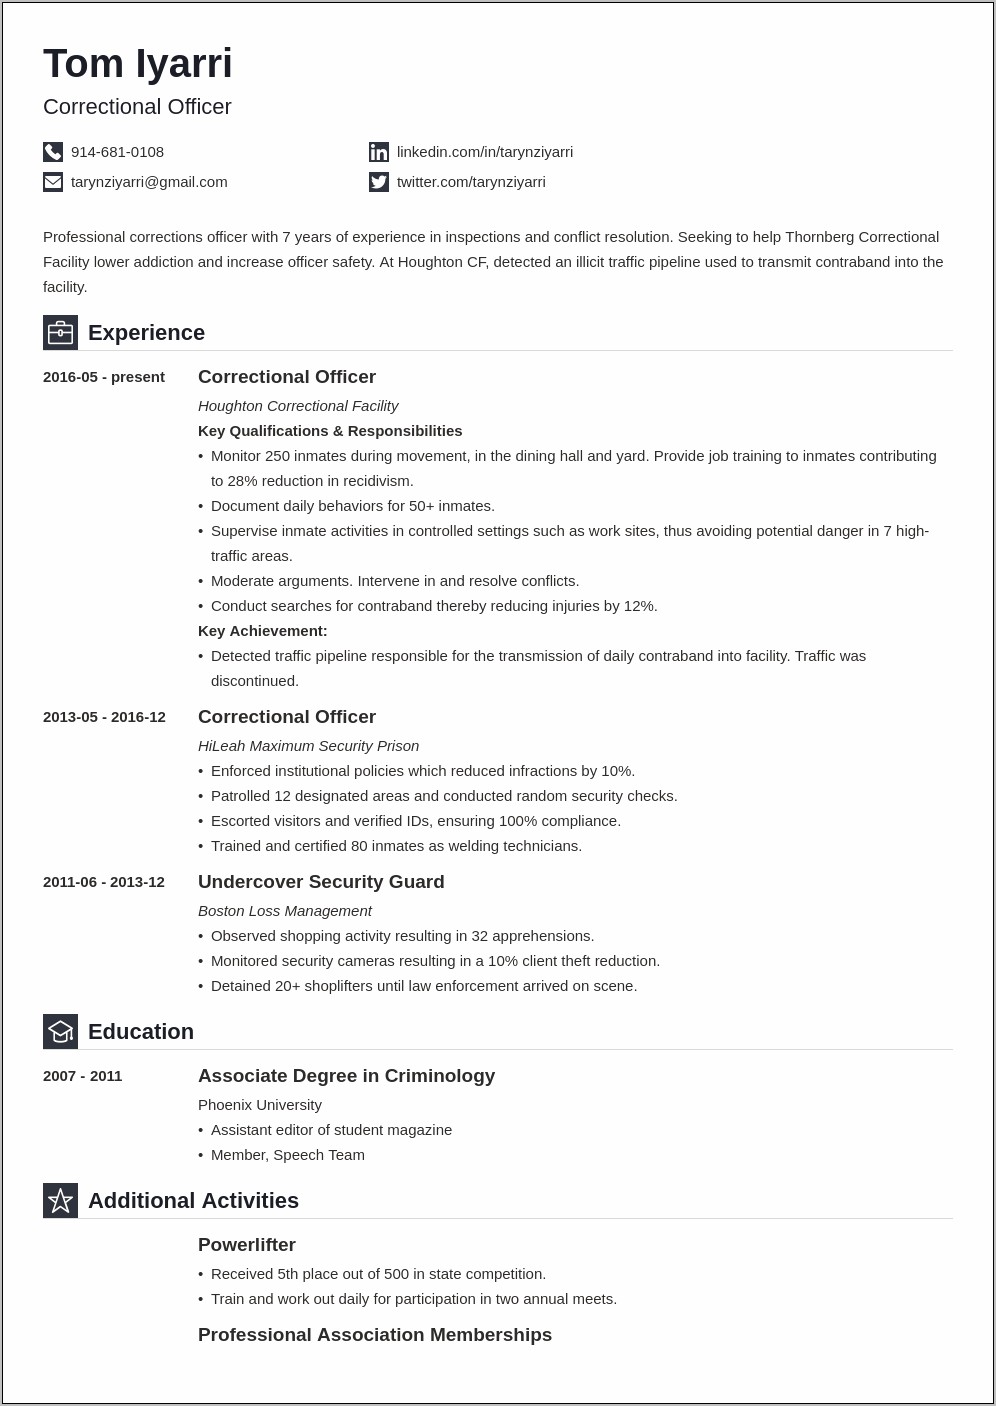 Correctional Officer Resume Work History With No Experience